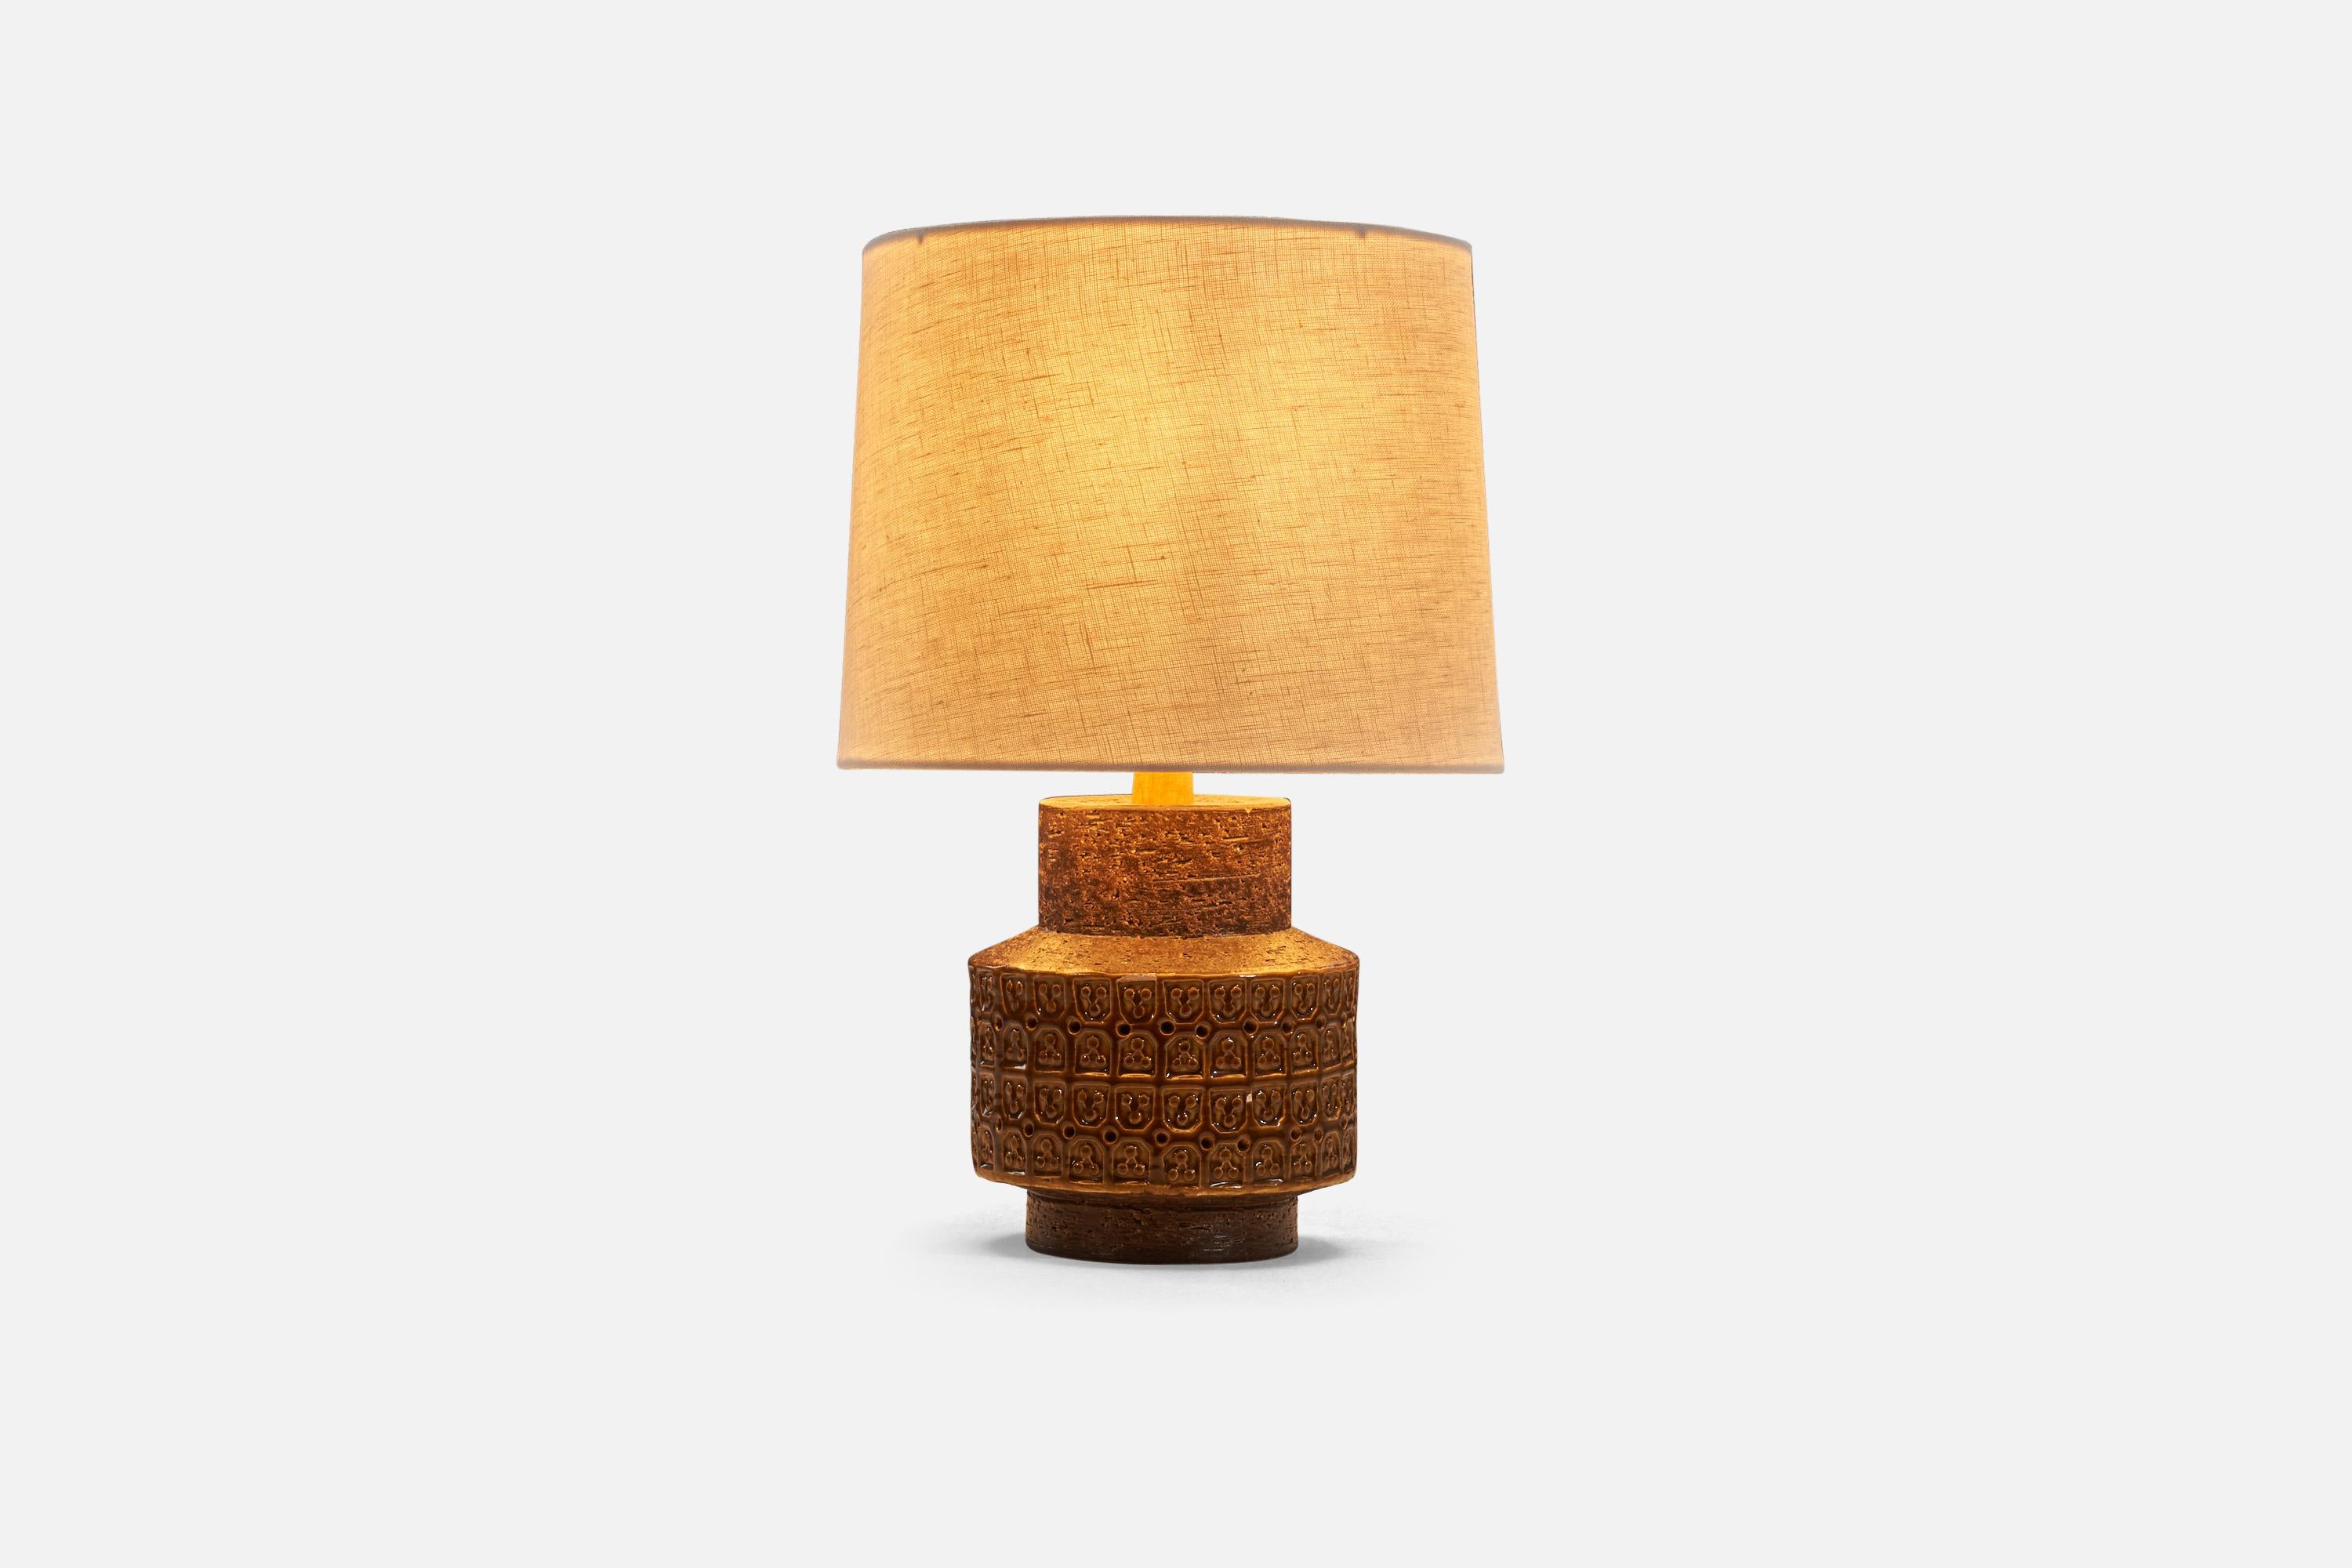 A brown, glazed stoneware table lamp designed and produced in Sweden, 1960s.

Sold without lampshade. 
Dimensions of Lamp (inches) : 11.125 x 5.75 x 5.75 (H x W x D)
Dimensions of Shade (inches) : 9.125 x 10 x 7.875 (T x B x H)
Dimension of Lamp